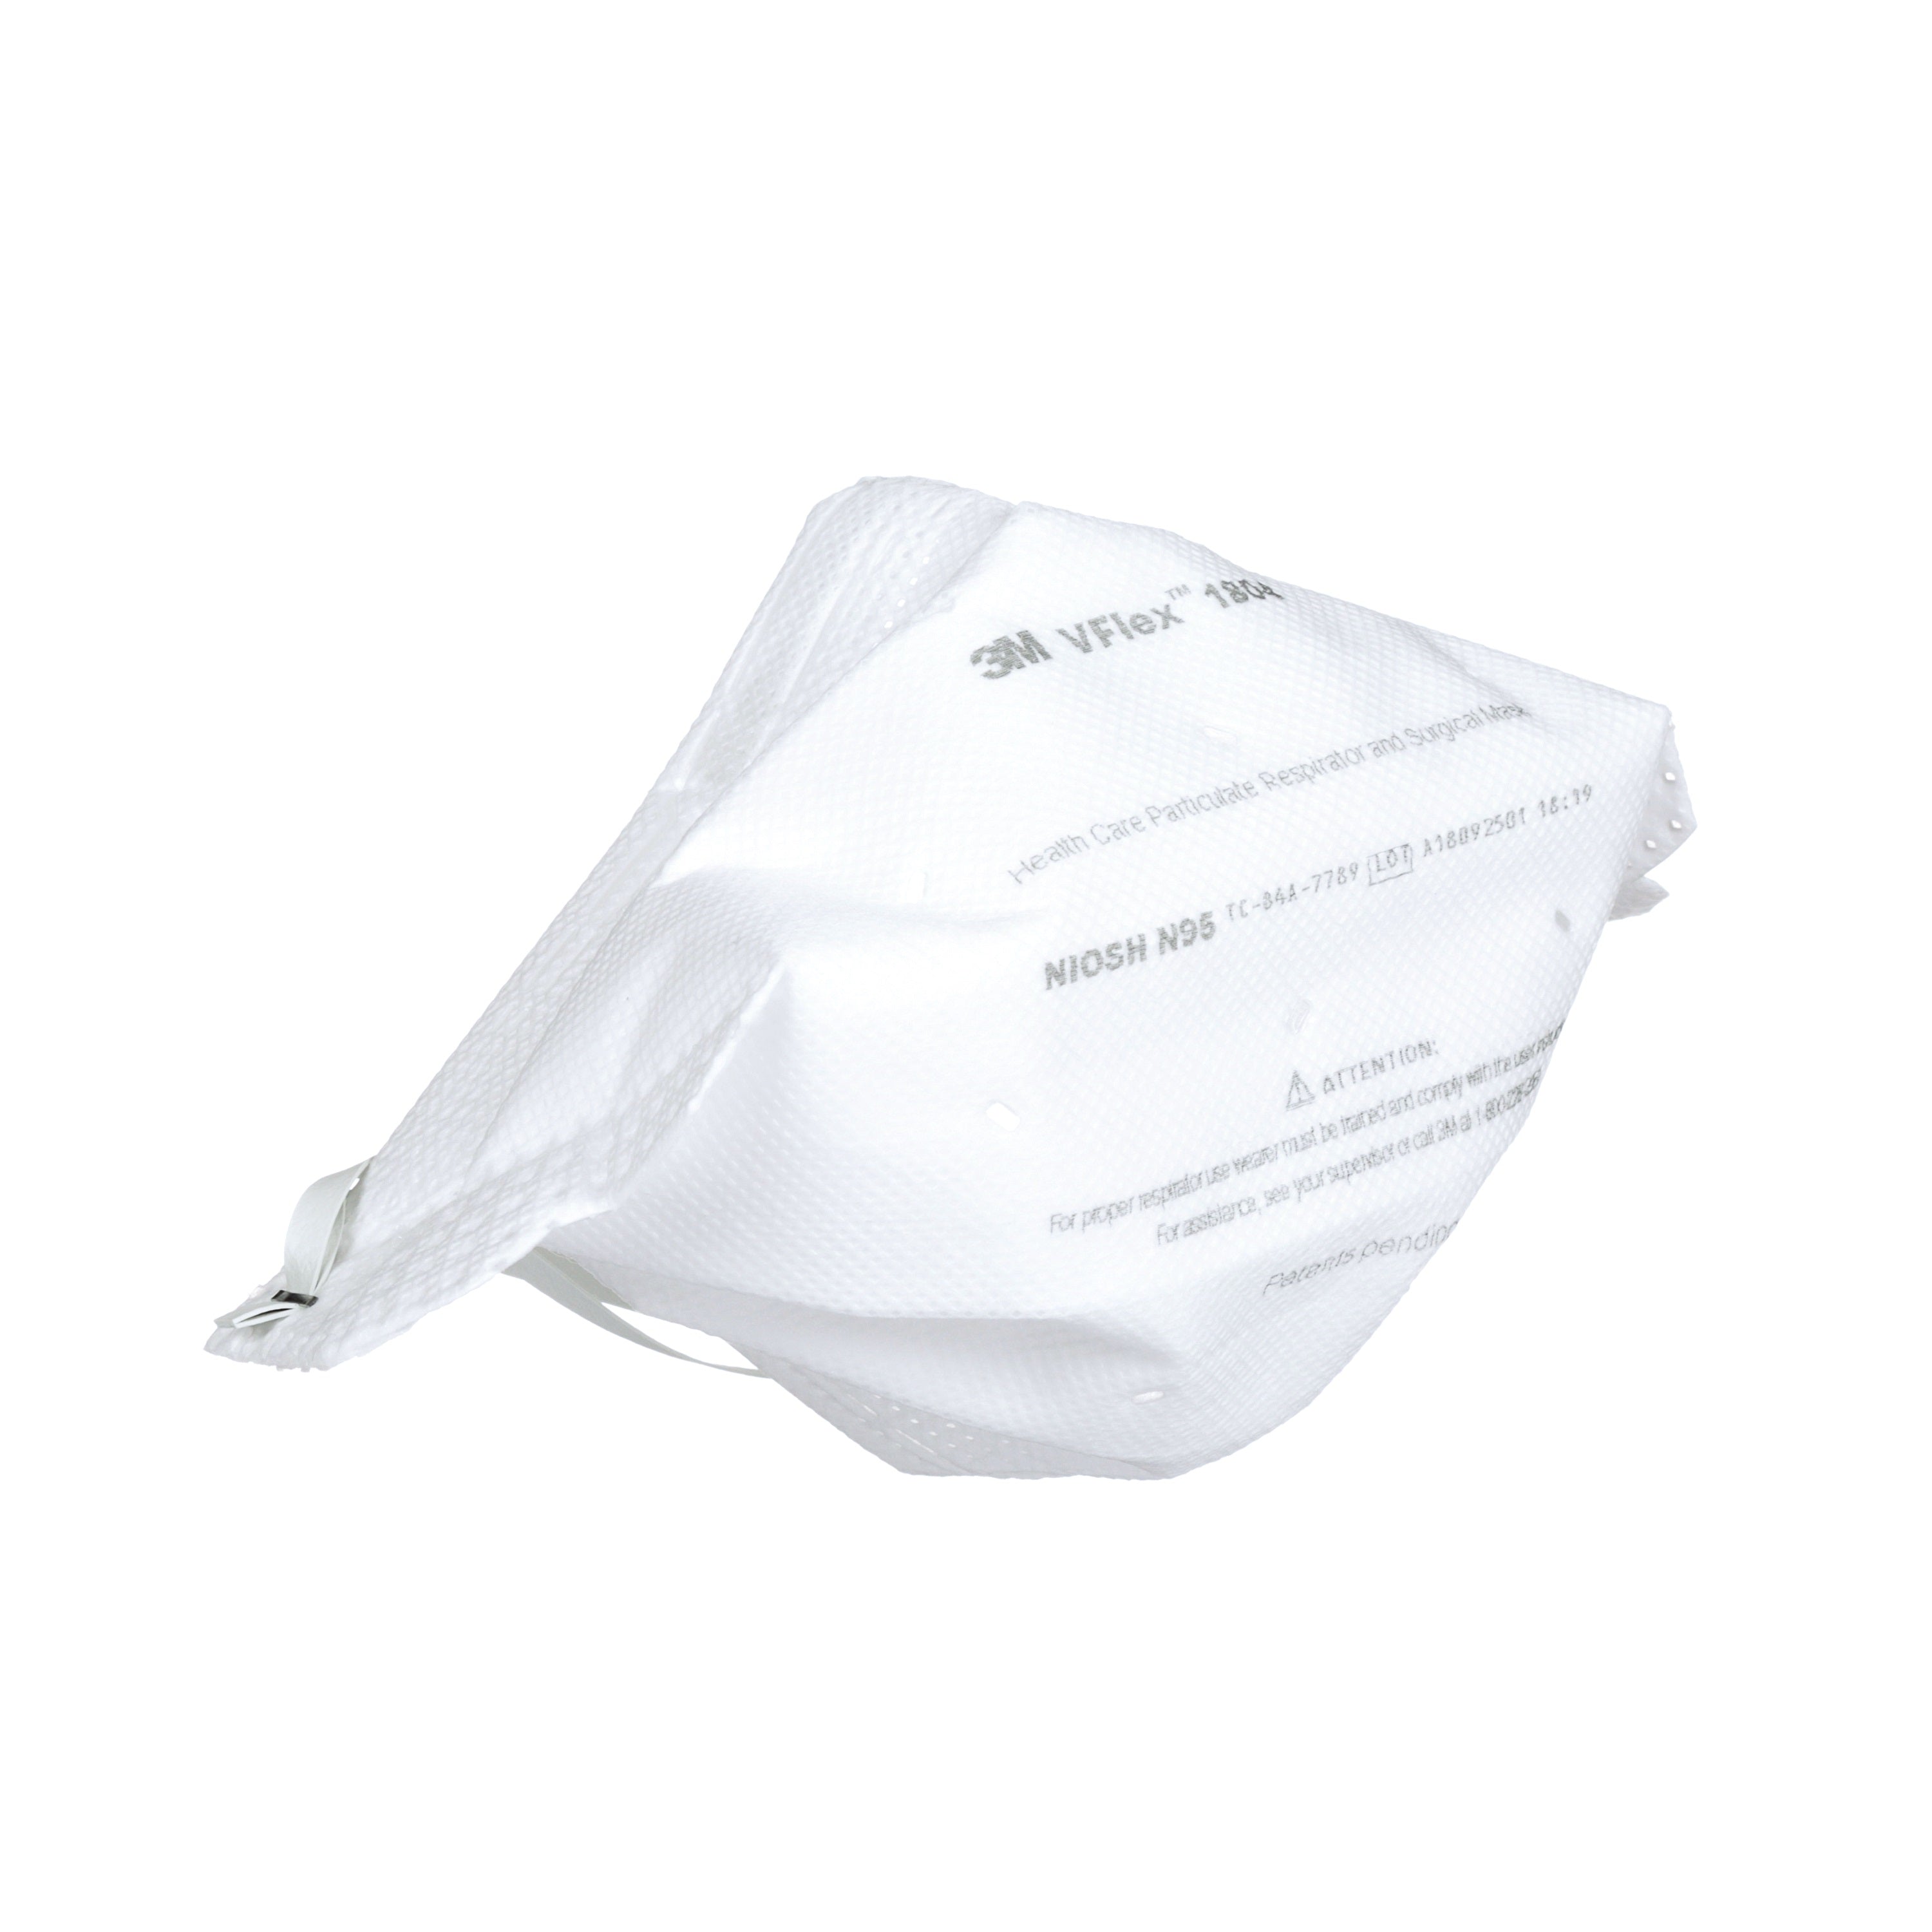 3M Canada Vflex 1804 Healthcare Surgical N95 respirator mask side view